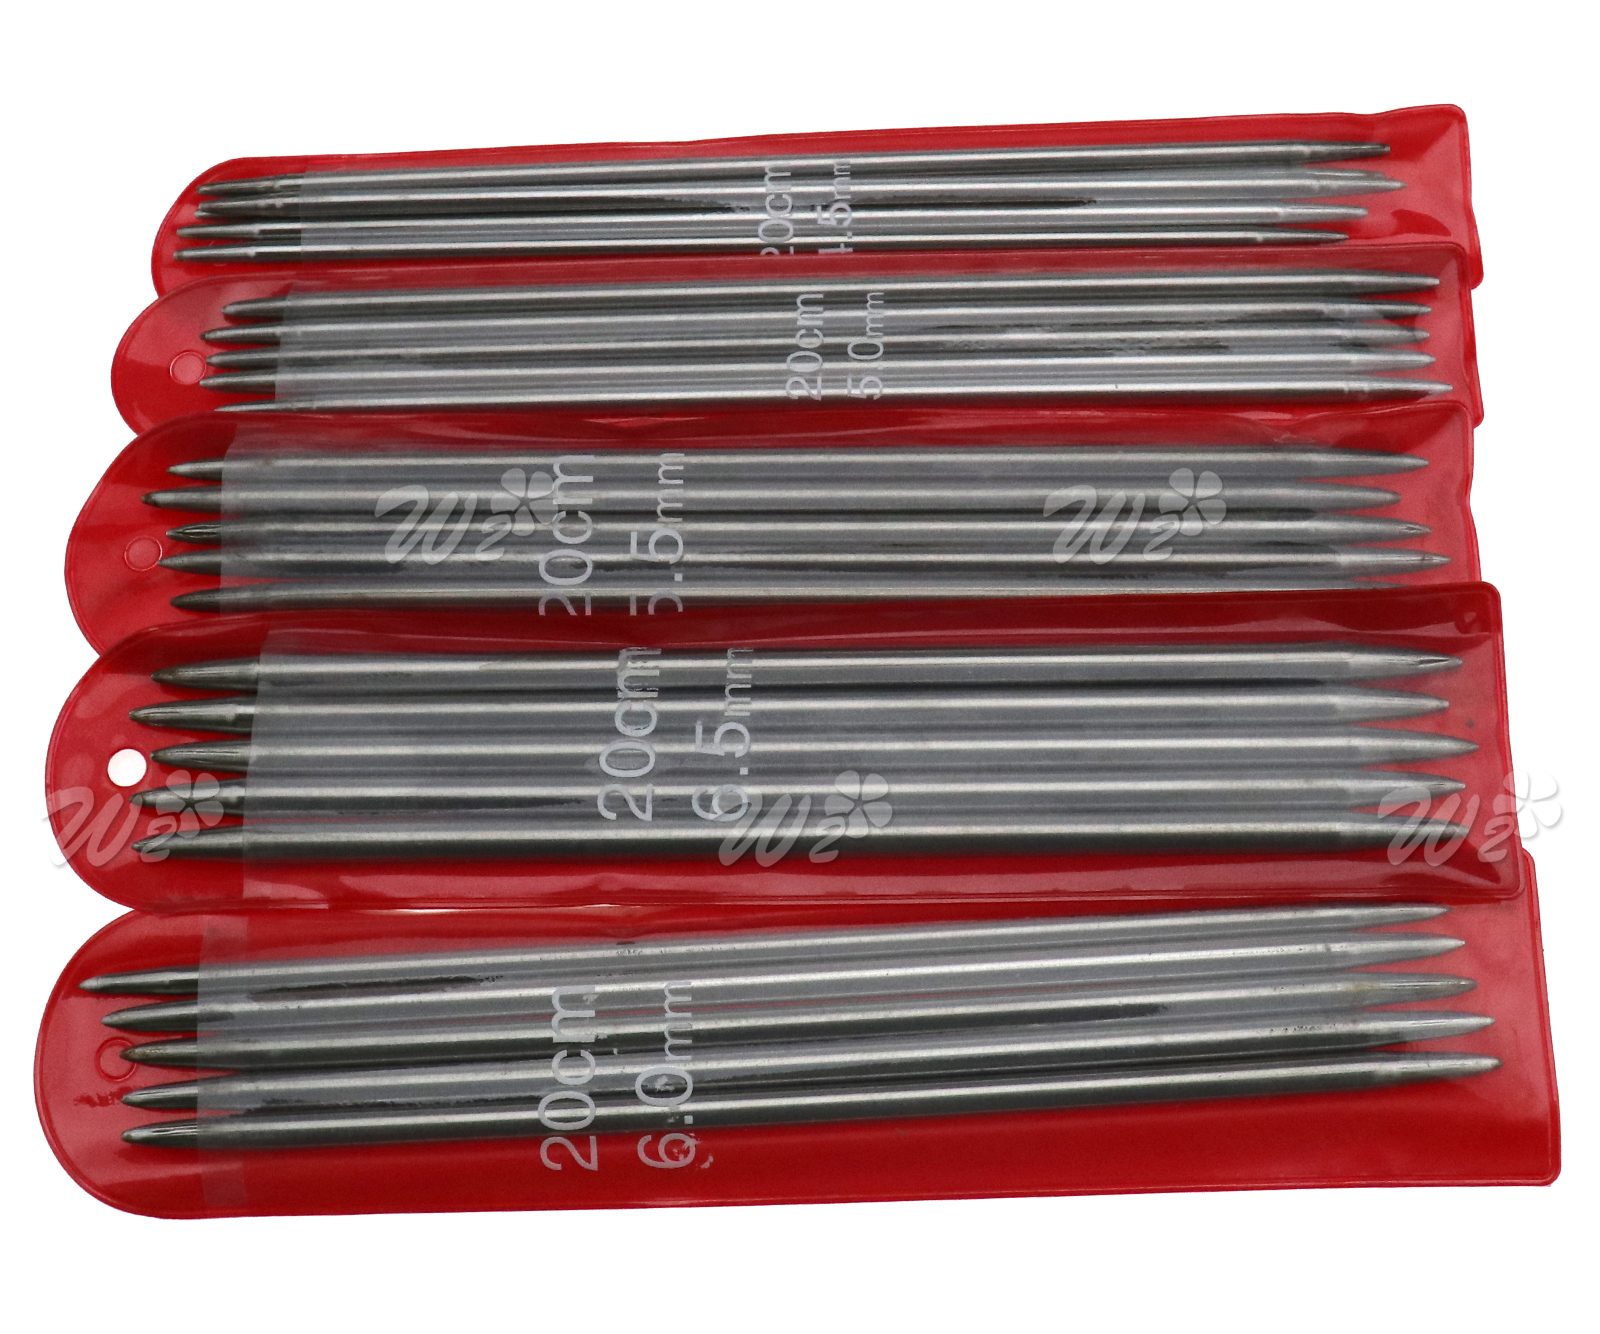 55 x 20cm Knitting Needles Kit Stainless Steel Double Point 2.0mm 6